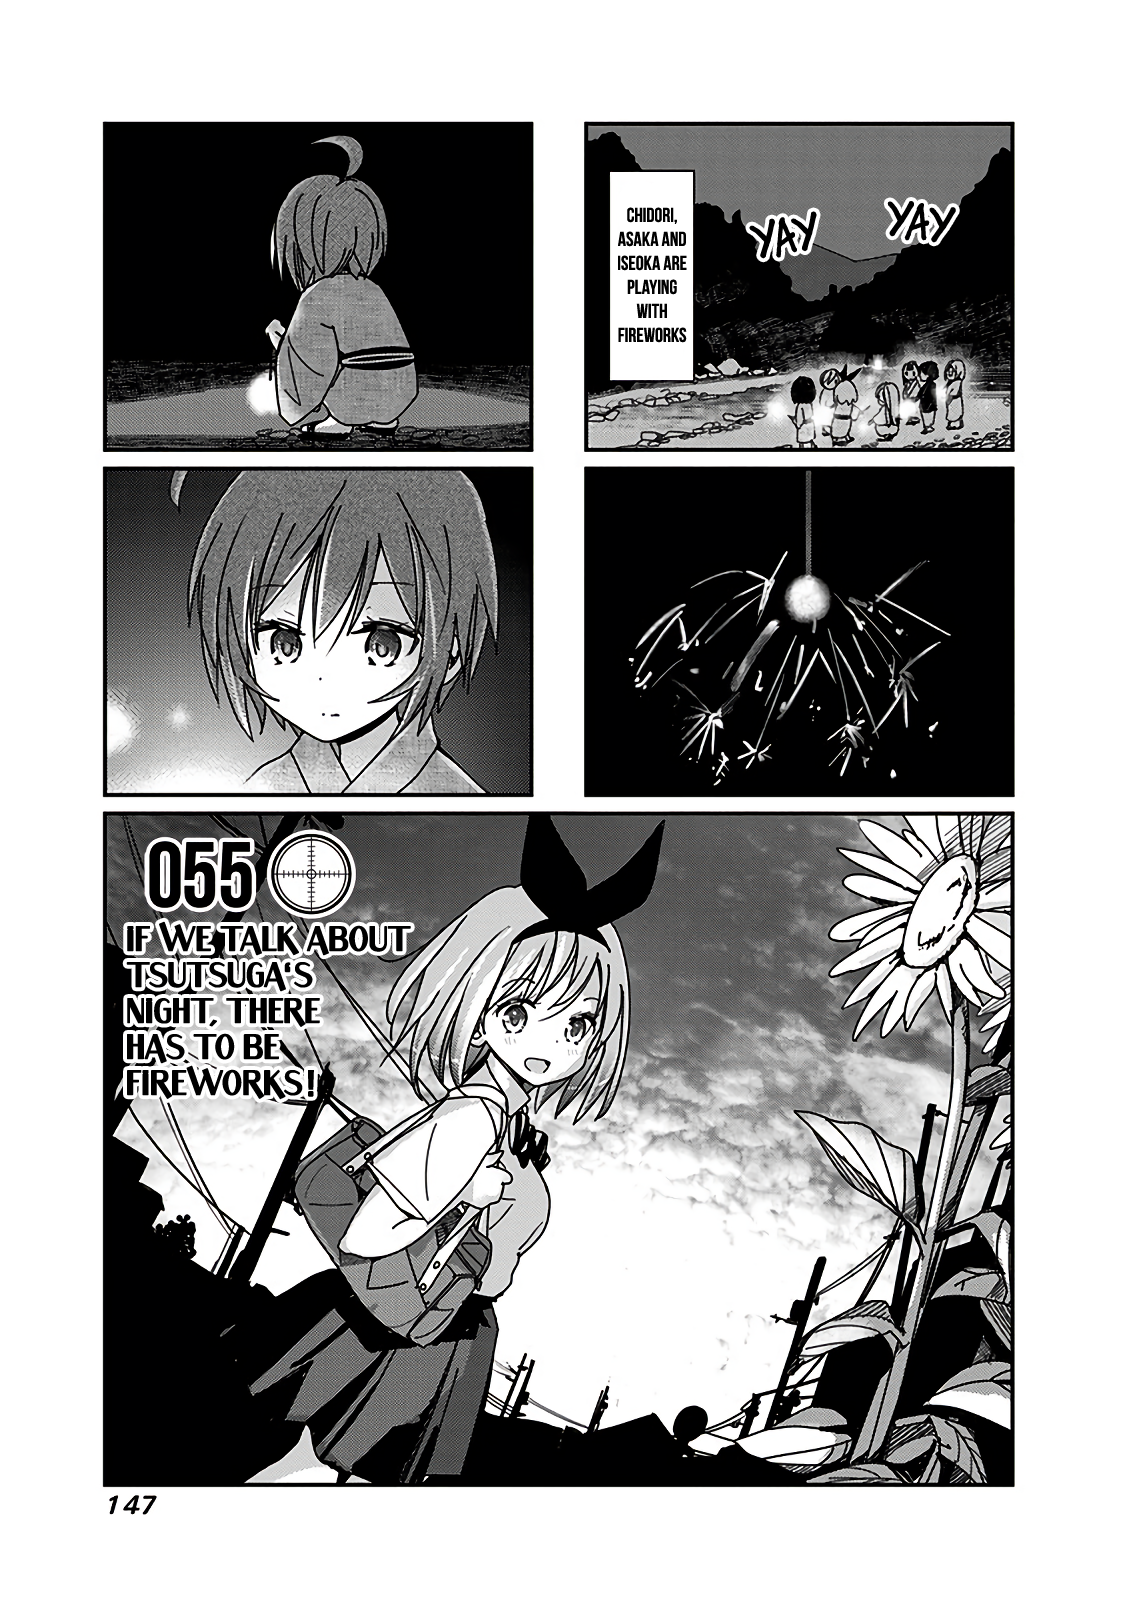 Rifle Is Beautiful Vol.3 Chapter 55: If We Talk About Tsutsuga's Night, There Has To Be Fireworks! - Picture 2